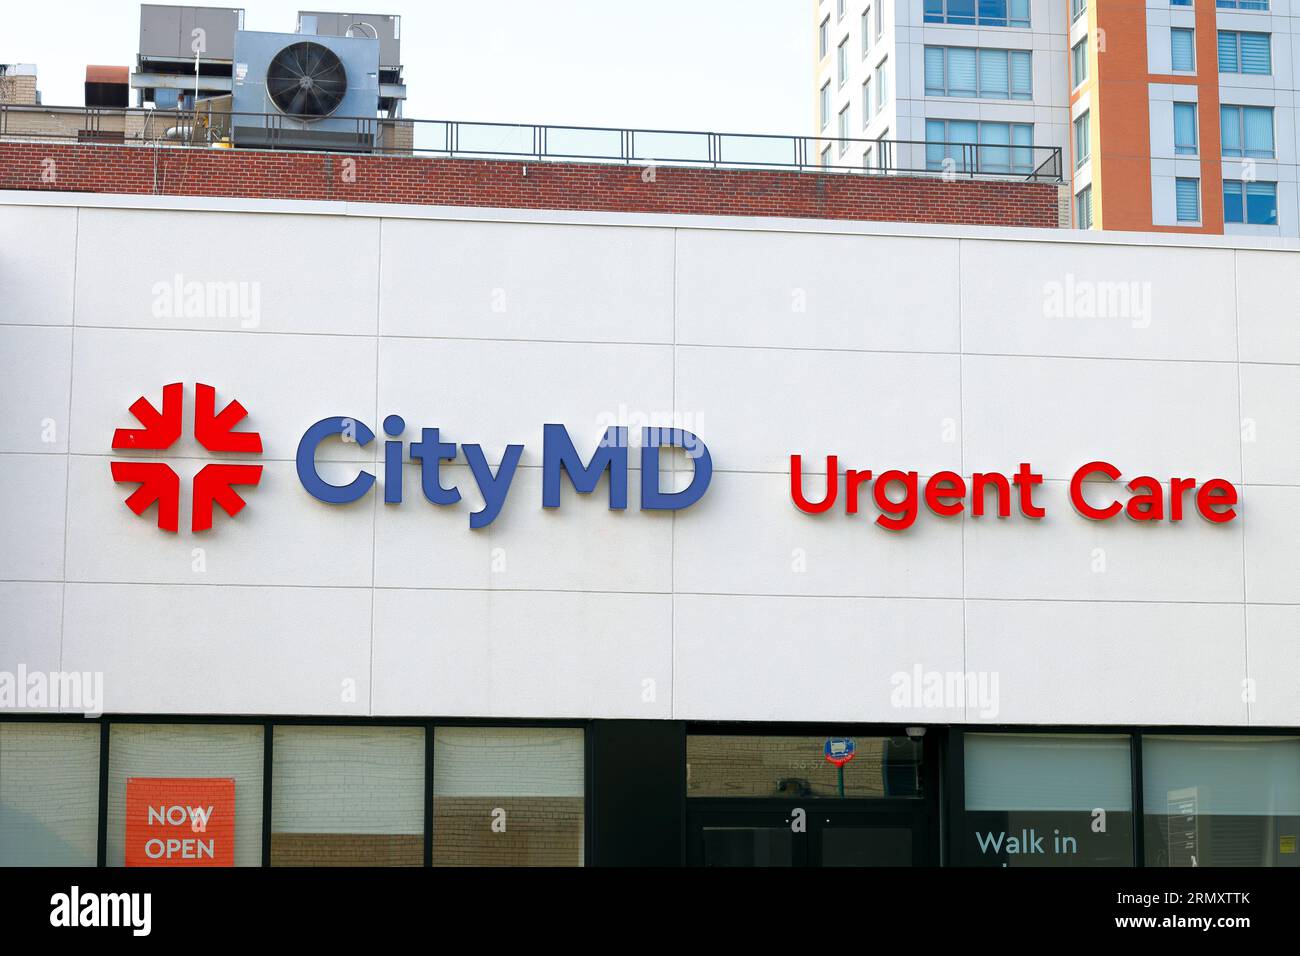 Signage at a CityMD Urgent Care center in New York City Stock Photo